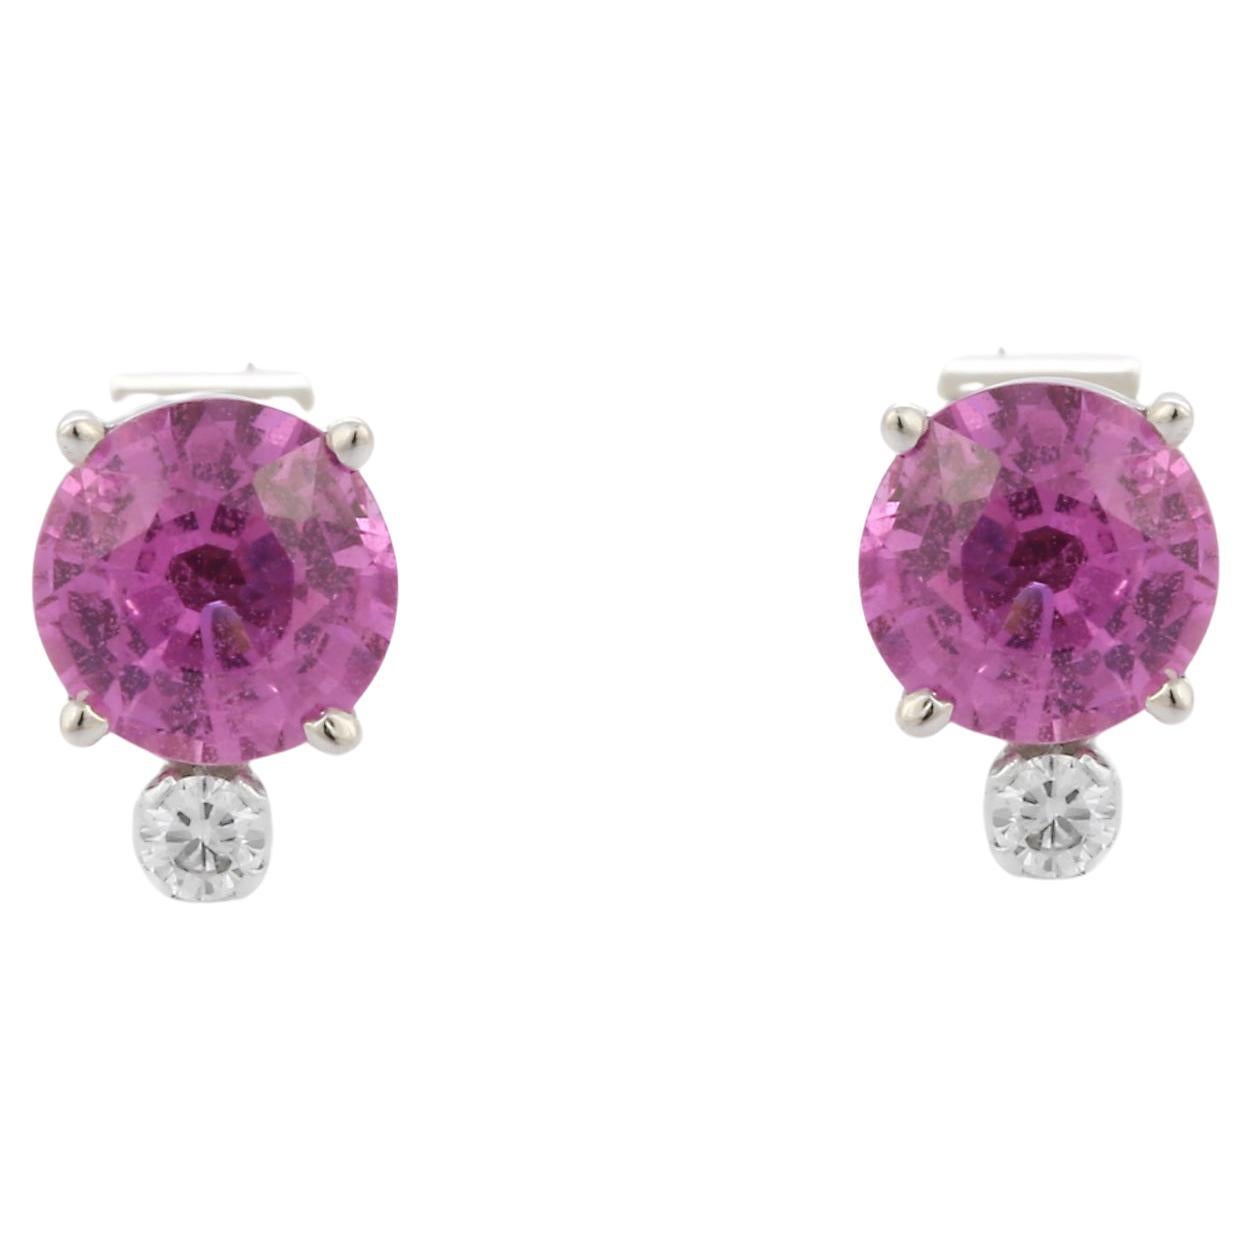 1.54 Carat Round Pink Sapphire Stud Earring in 18K Solid White Gold with Diamond For Sale